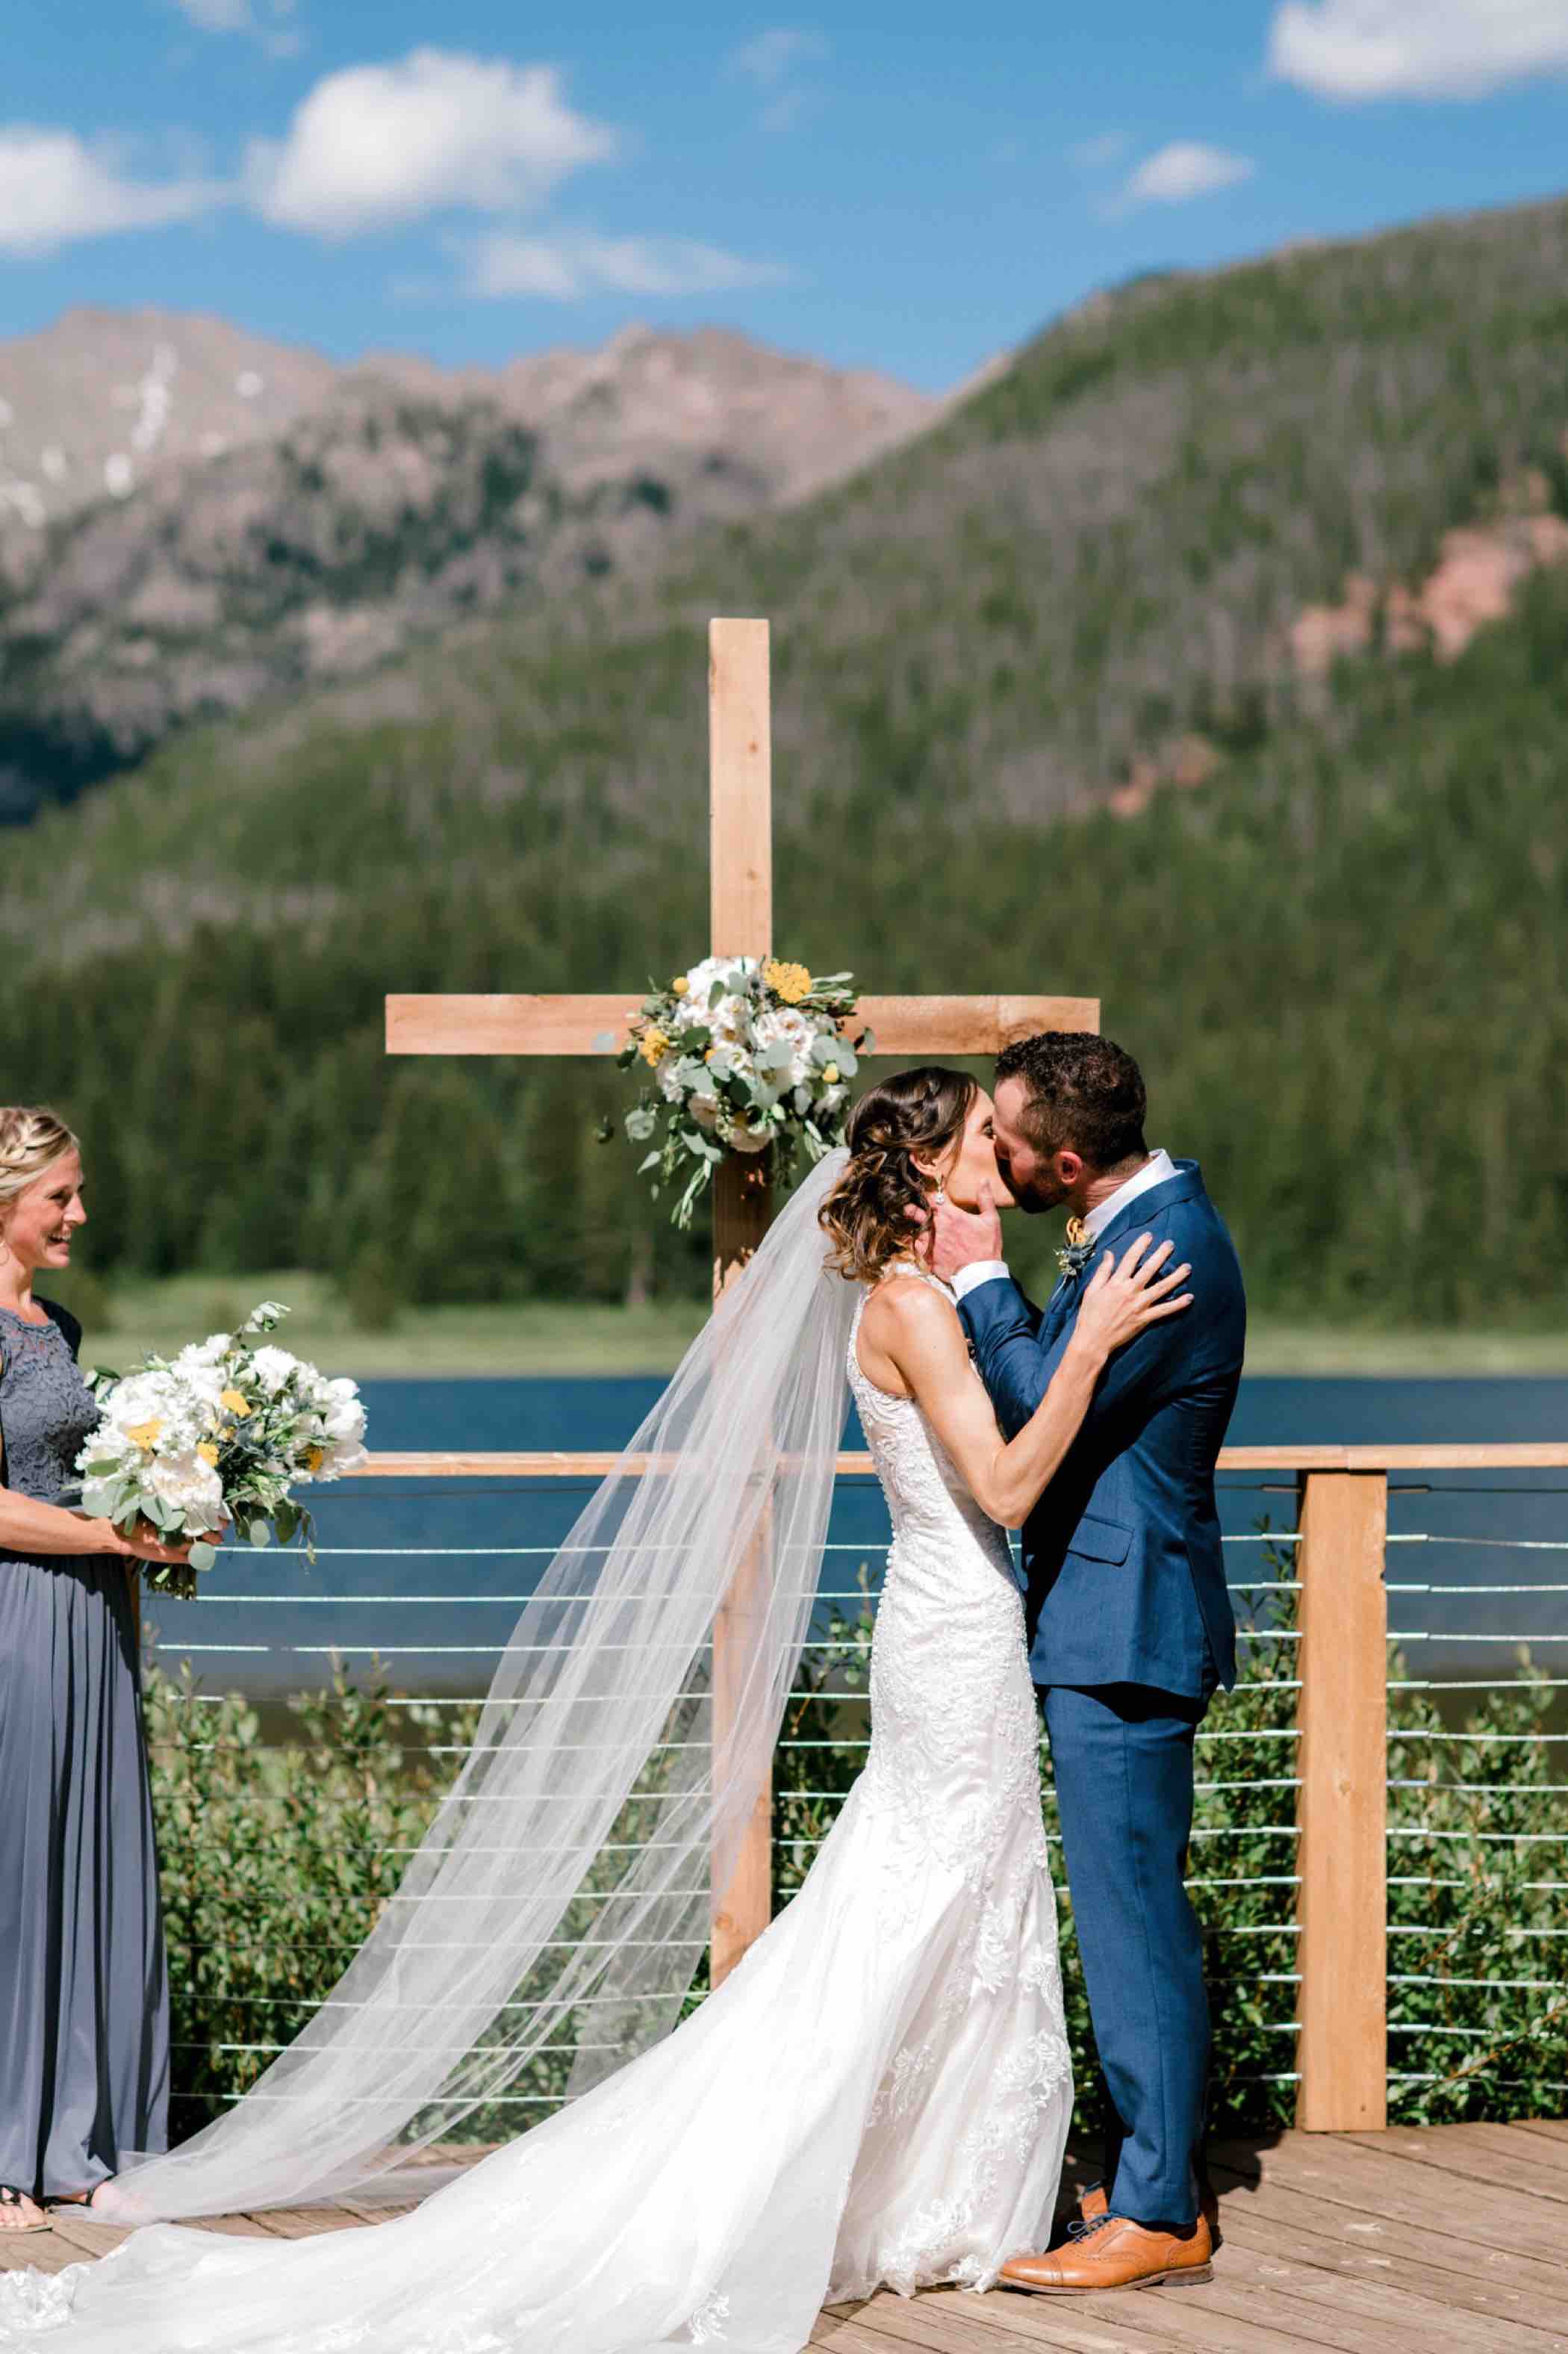 Bride and groom share their first kiss as a married couple at Piney River Ranch in Vail, Colorado. Photo by Ali and Garrett, Romantic, Adventurous, Nostalgic Wedding Photographers.